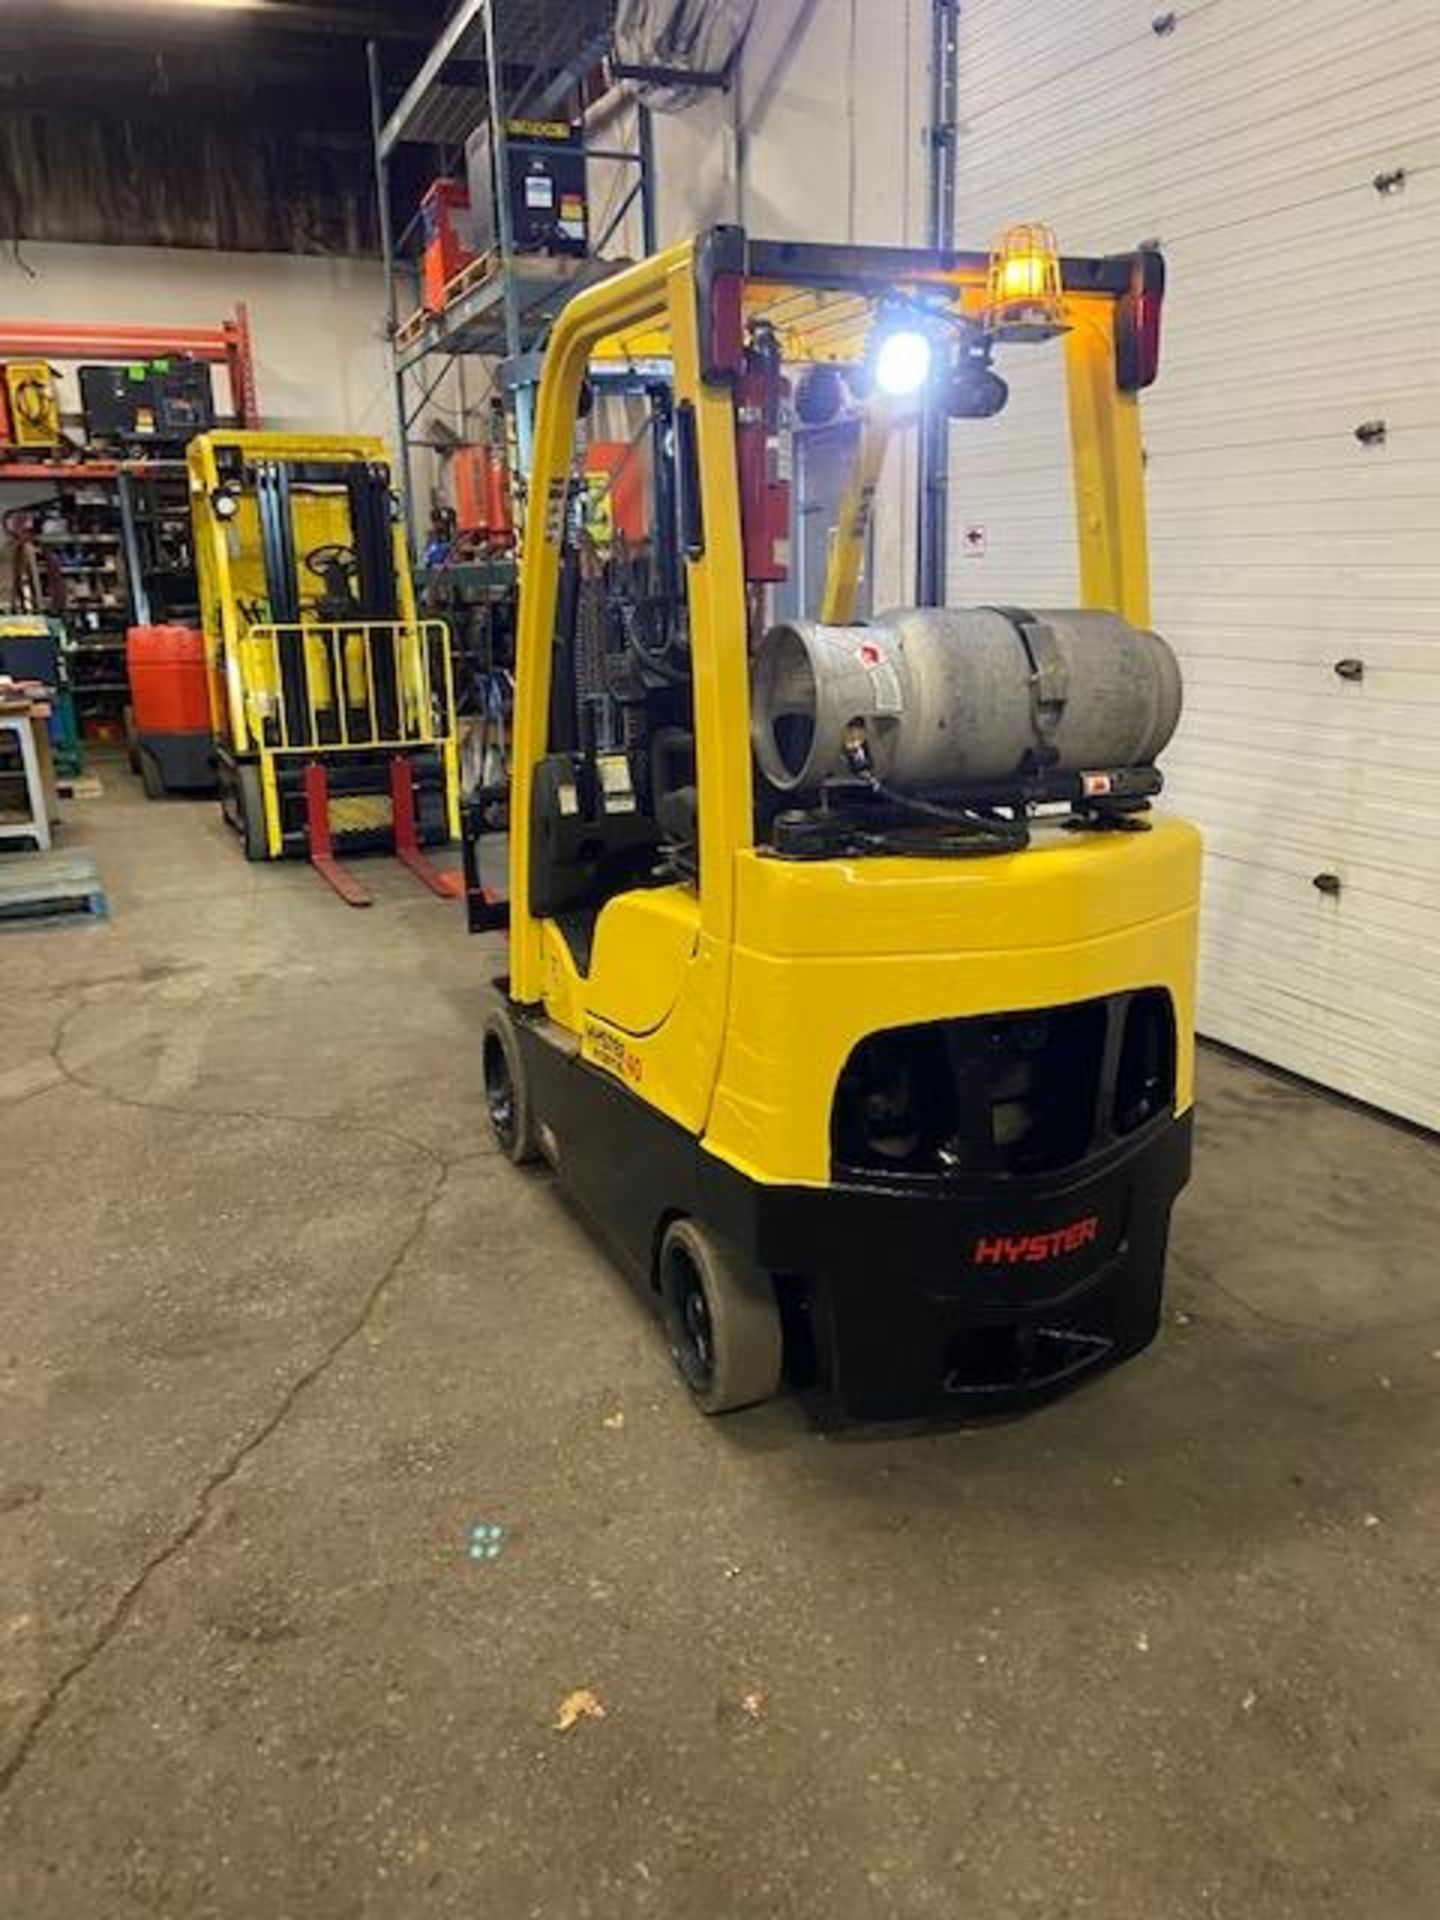 FREE CUSTOMS - 2016 Hyster 4,000lbs Capacity Forklift LPG (propane) with 3-stage mast & sideshift ( - Image 3 of 3